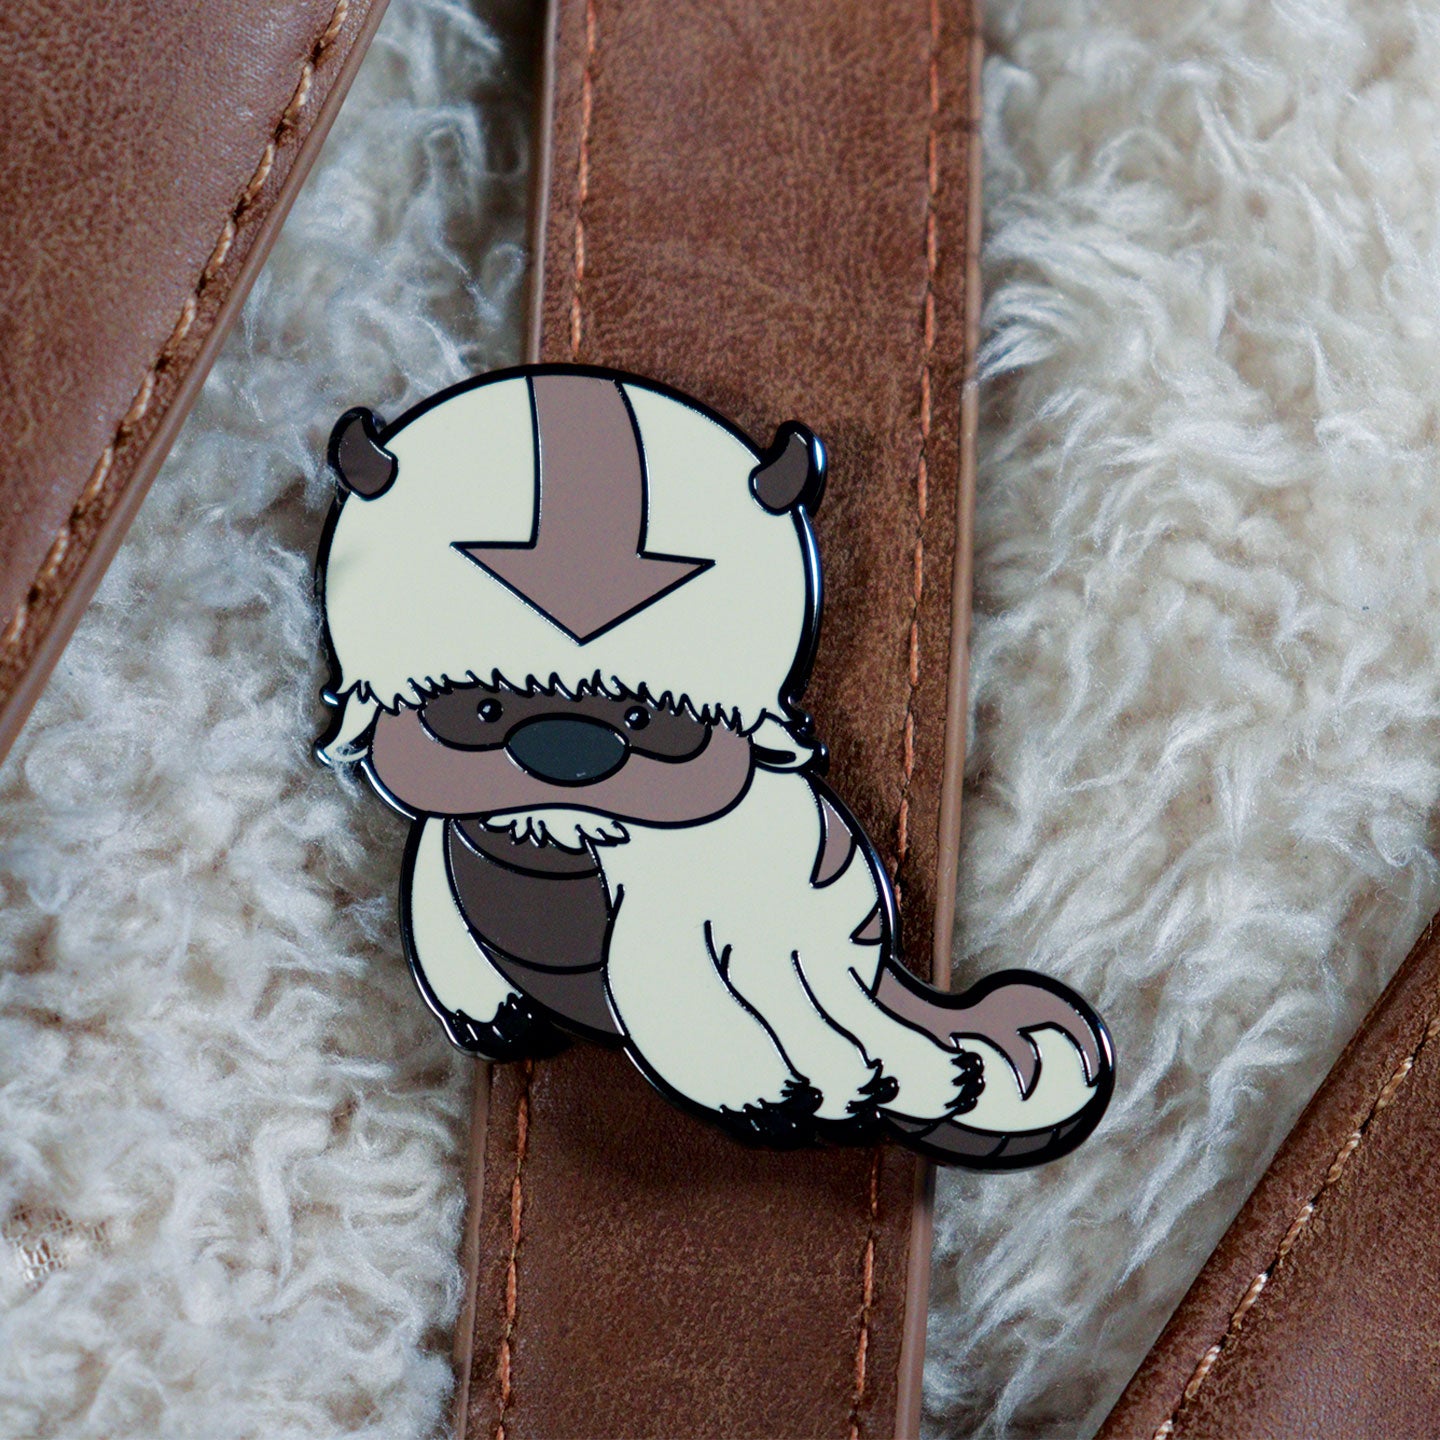 Avatar the Last Airbender Limited Edition Appa Pin Badge